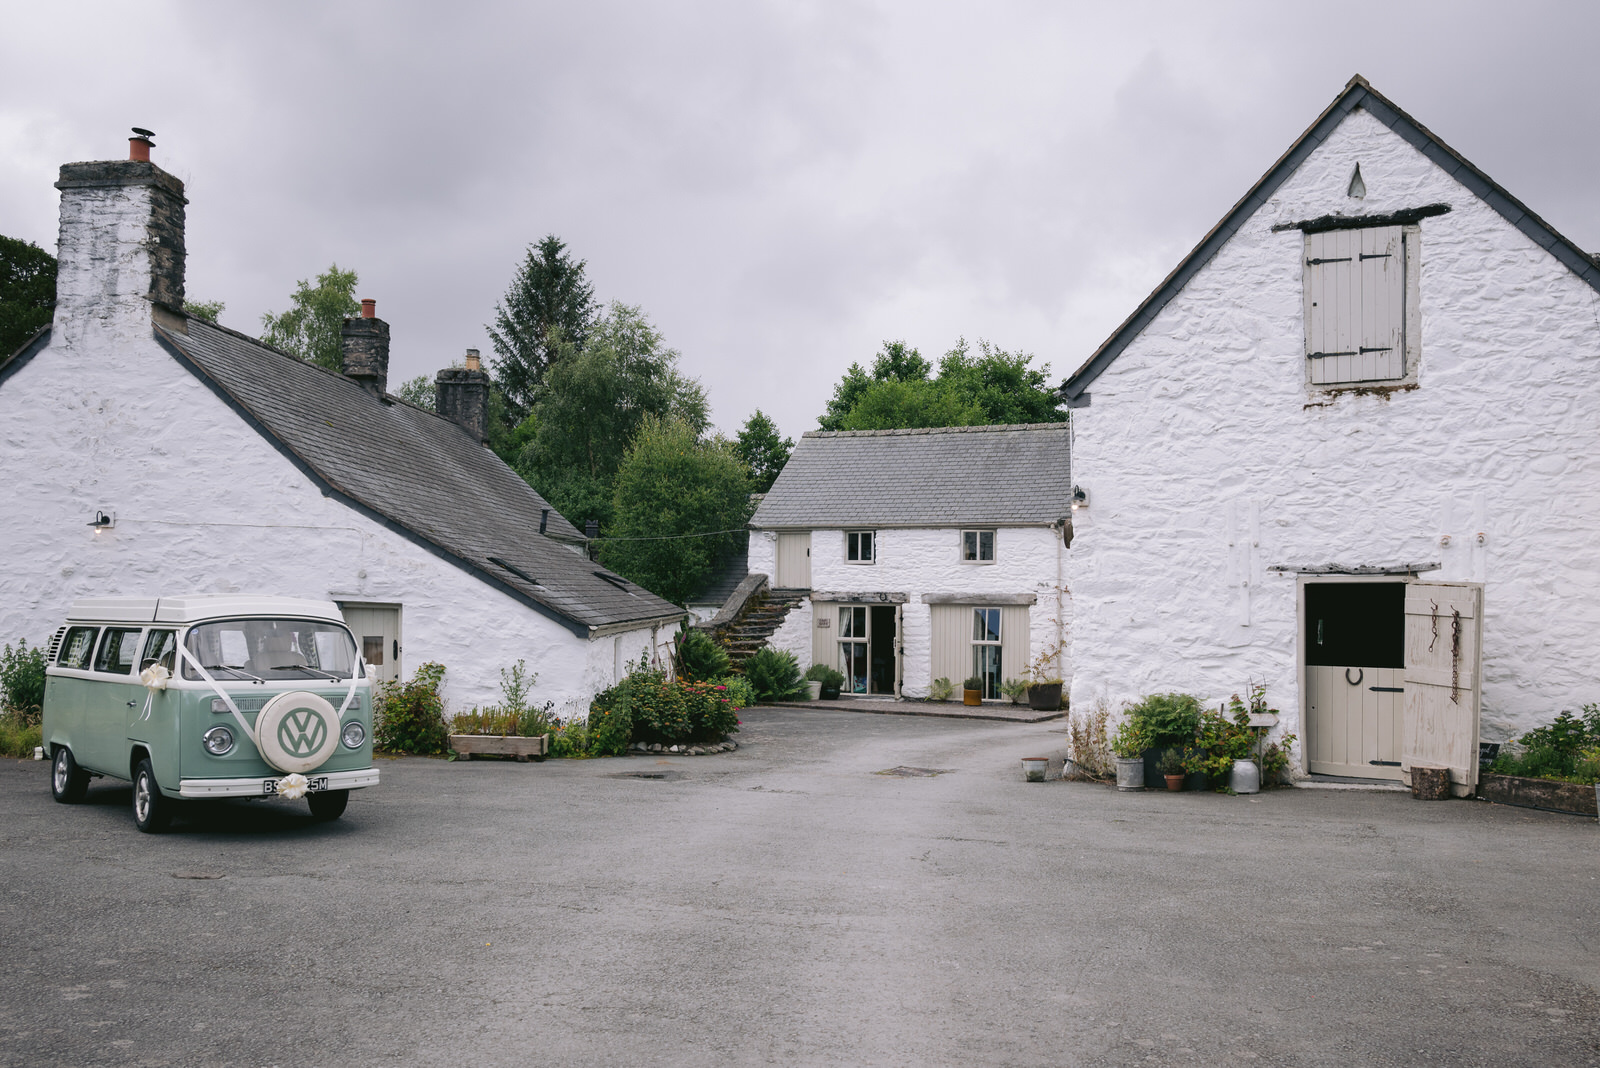 Exterior photographs of Hafod Farm before a wedding, showing the buildings and a campervan